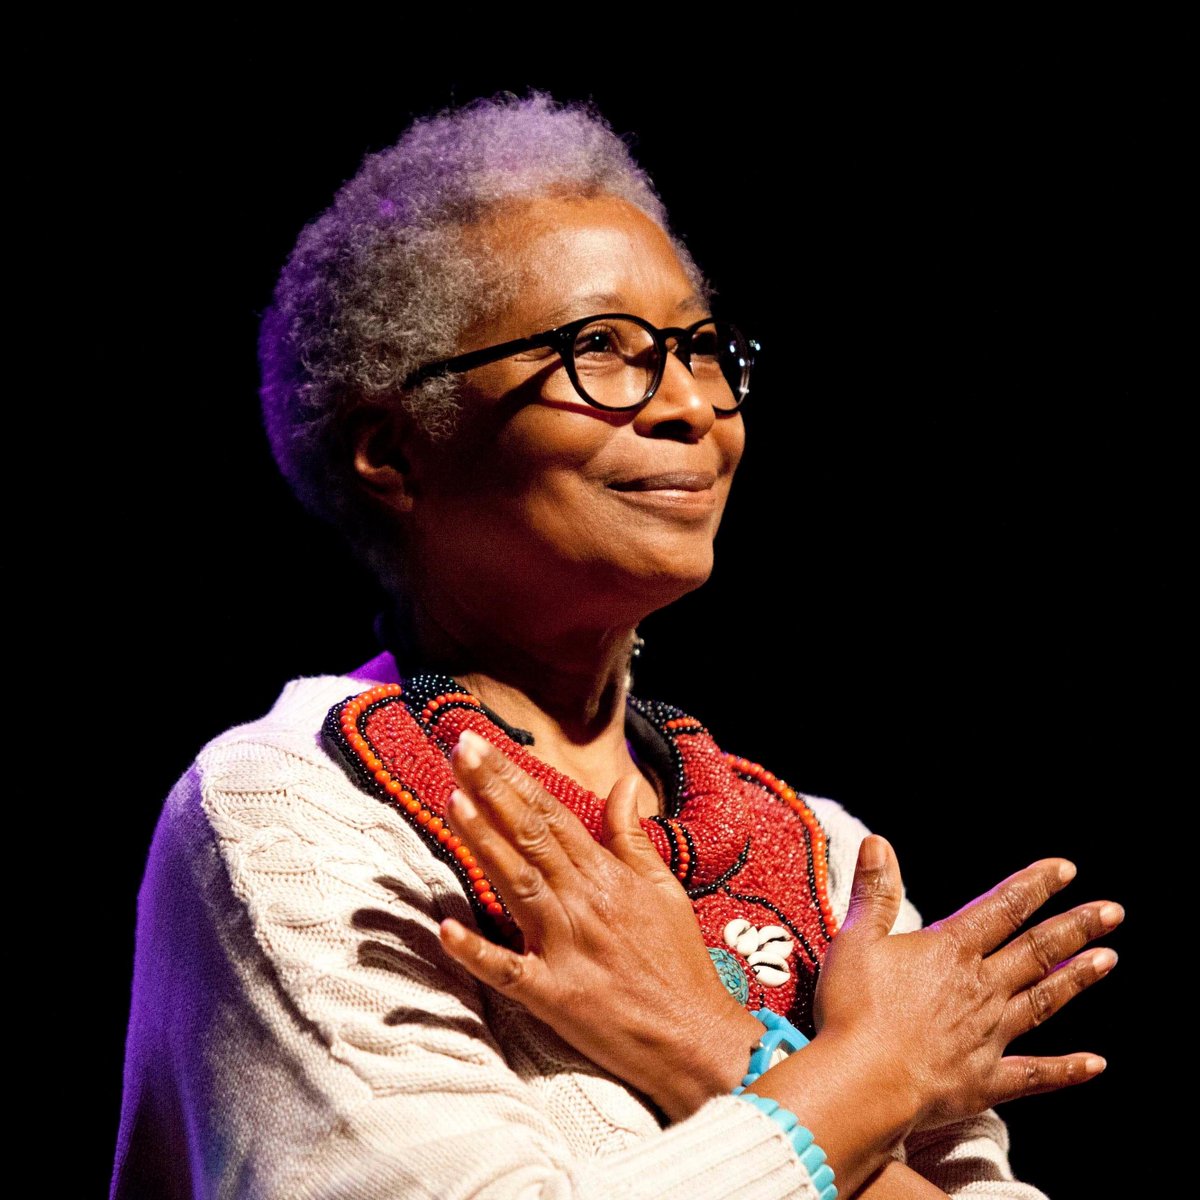 #OnThisDay Alice Walker became the first Black woman to win the Pultizer Prize for fiction in 1983 for her novel 'The Color Purple.'
#AliceWalker #BlackHistory